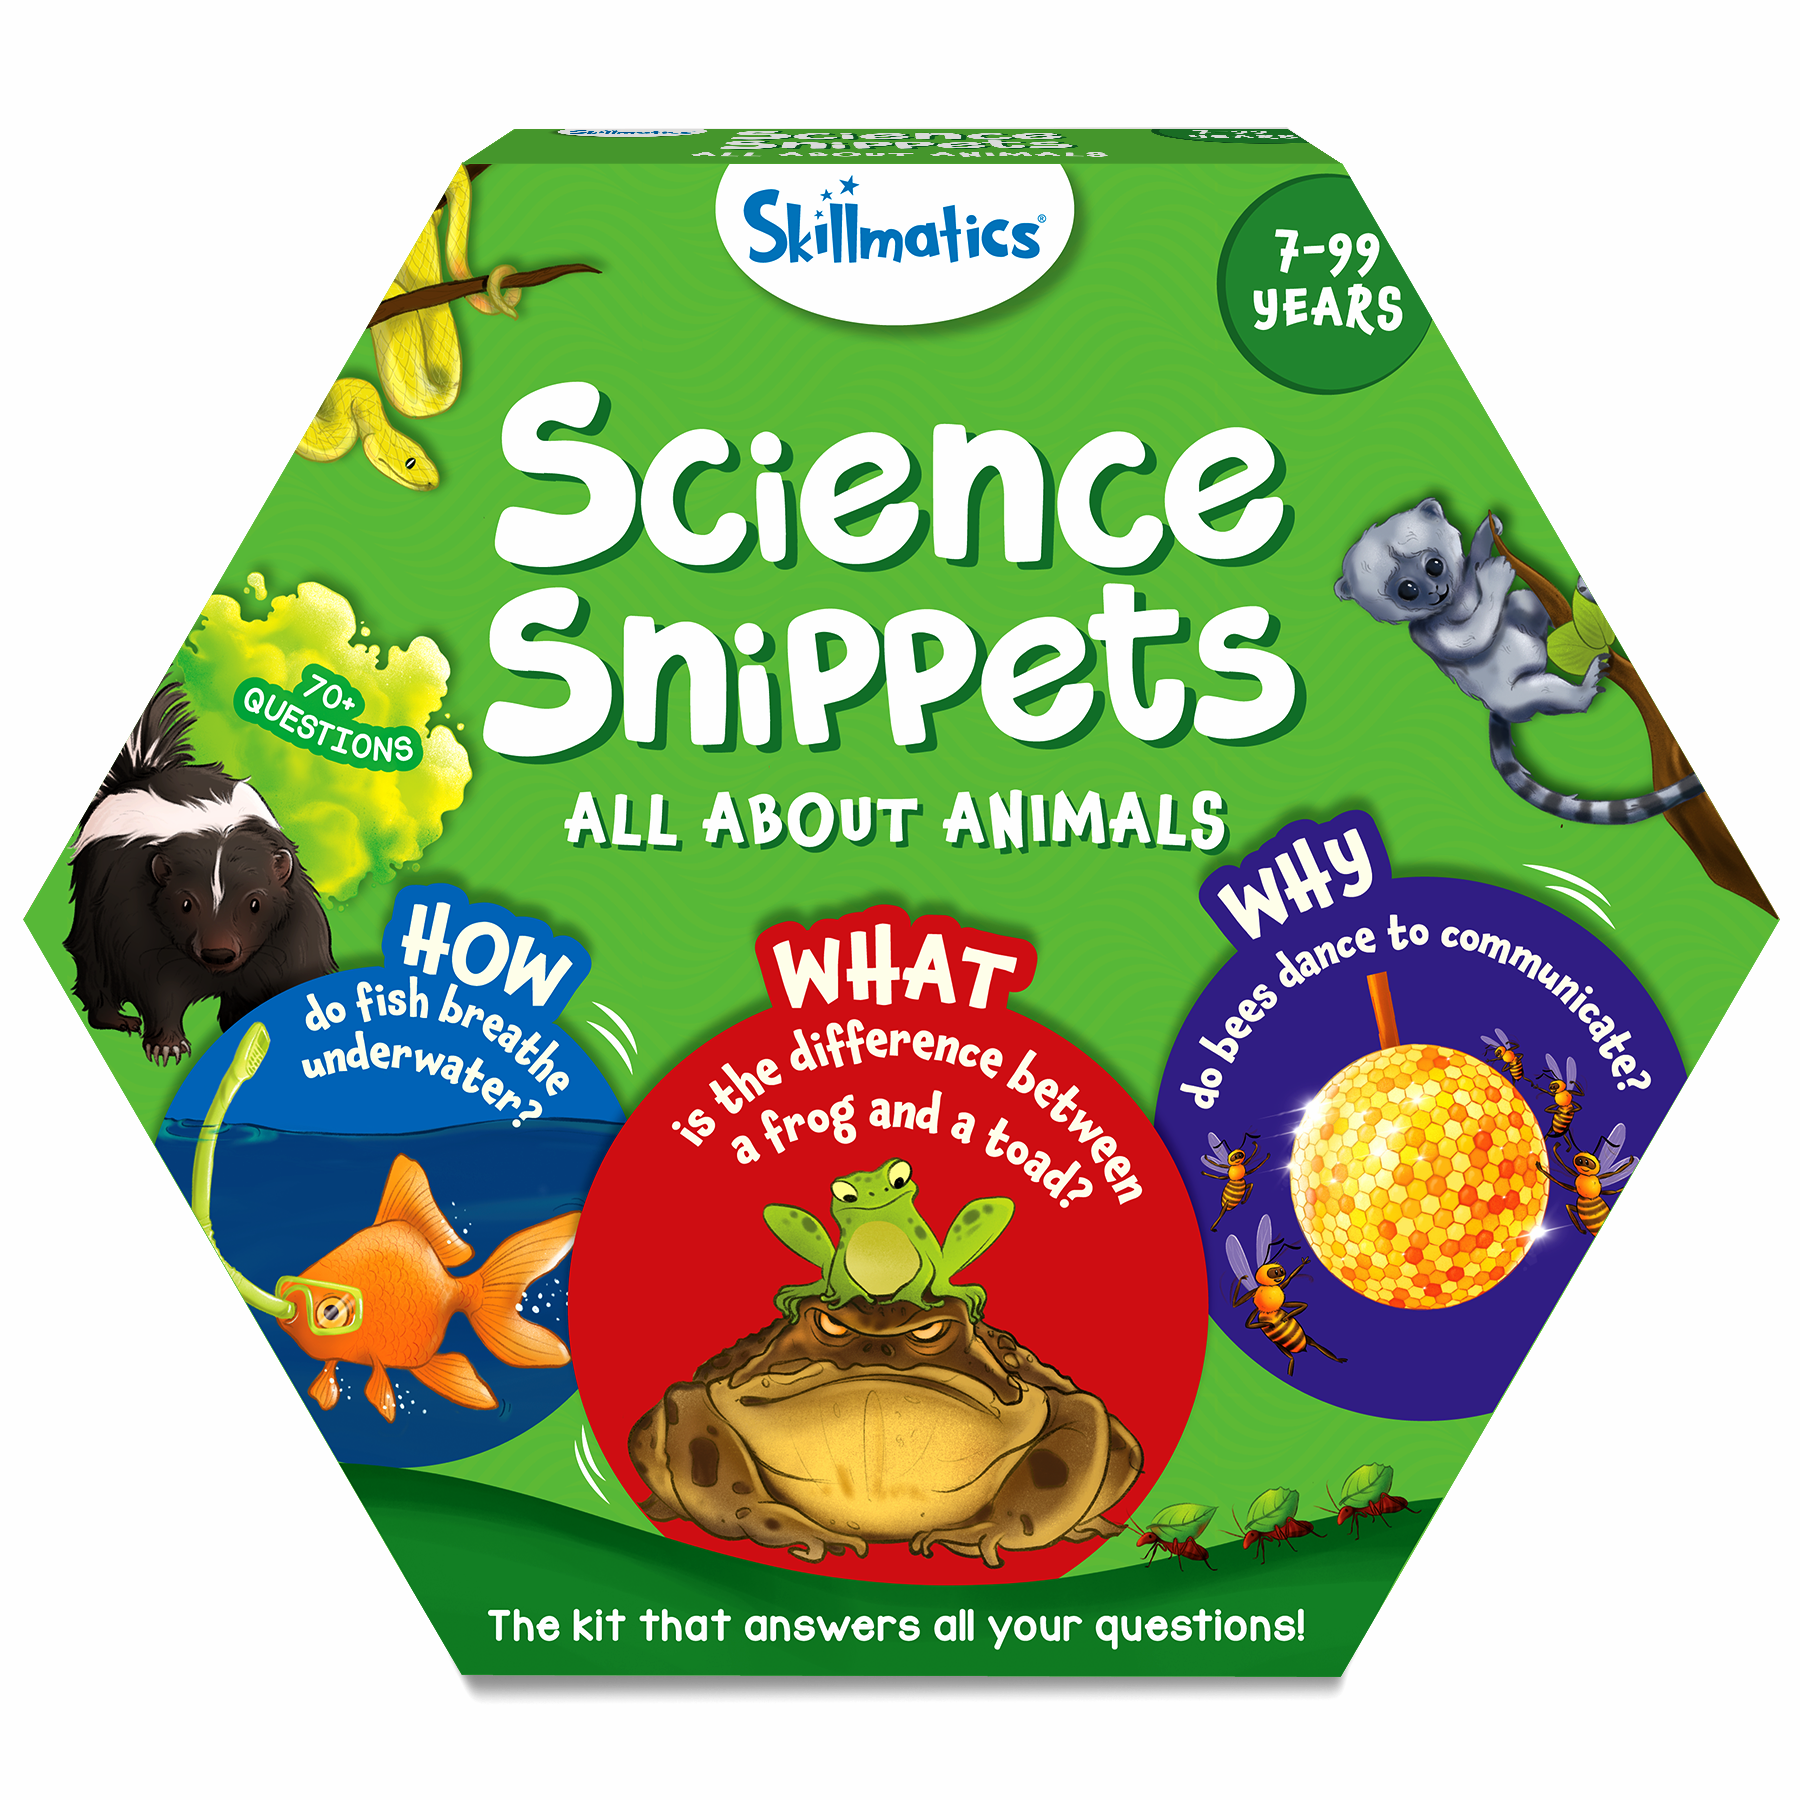 Skillmatics Science Snippets Animals Kit - STEM Learning Resource & Educational Toys for Boys & Girls, 70+ Double-Sided Interactive Cards, Gifts for Ages 7, 8, 9 & Up